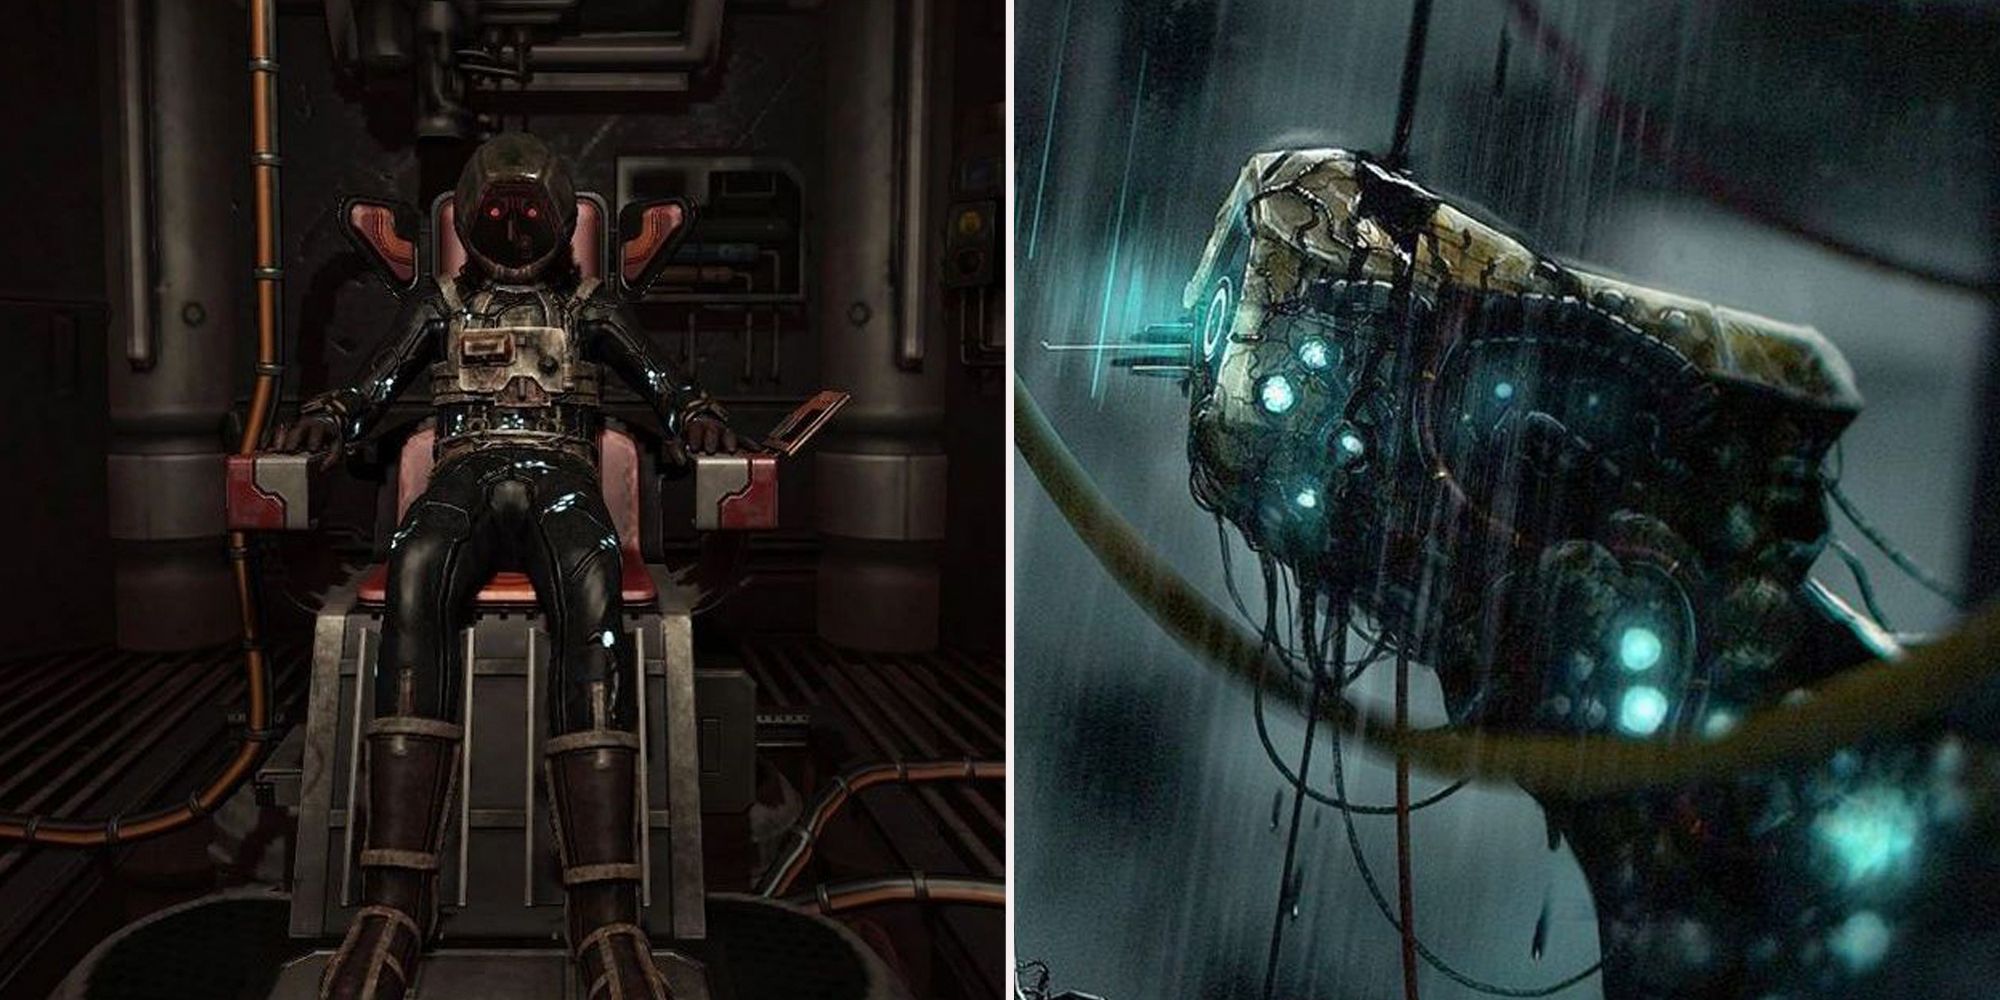 Soma, character in a black suit on the left. They're strapped to a chair and have red glowing eyes. On the right is one half of the official poster featuring a robot emanating a glowing blue light.